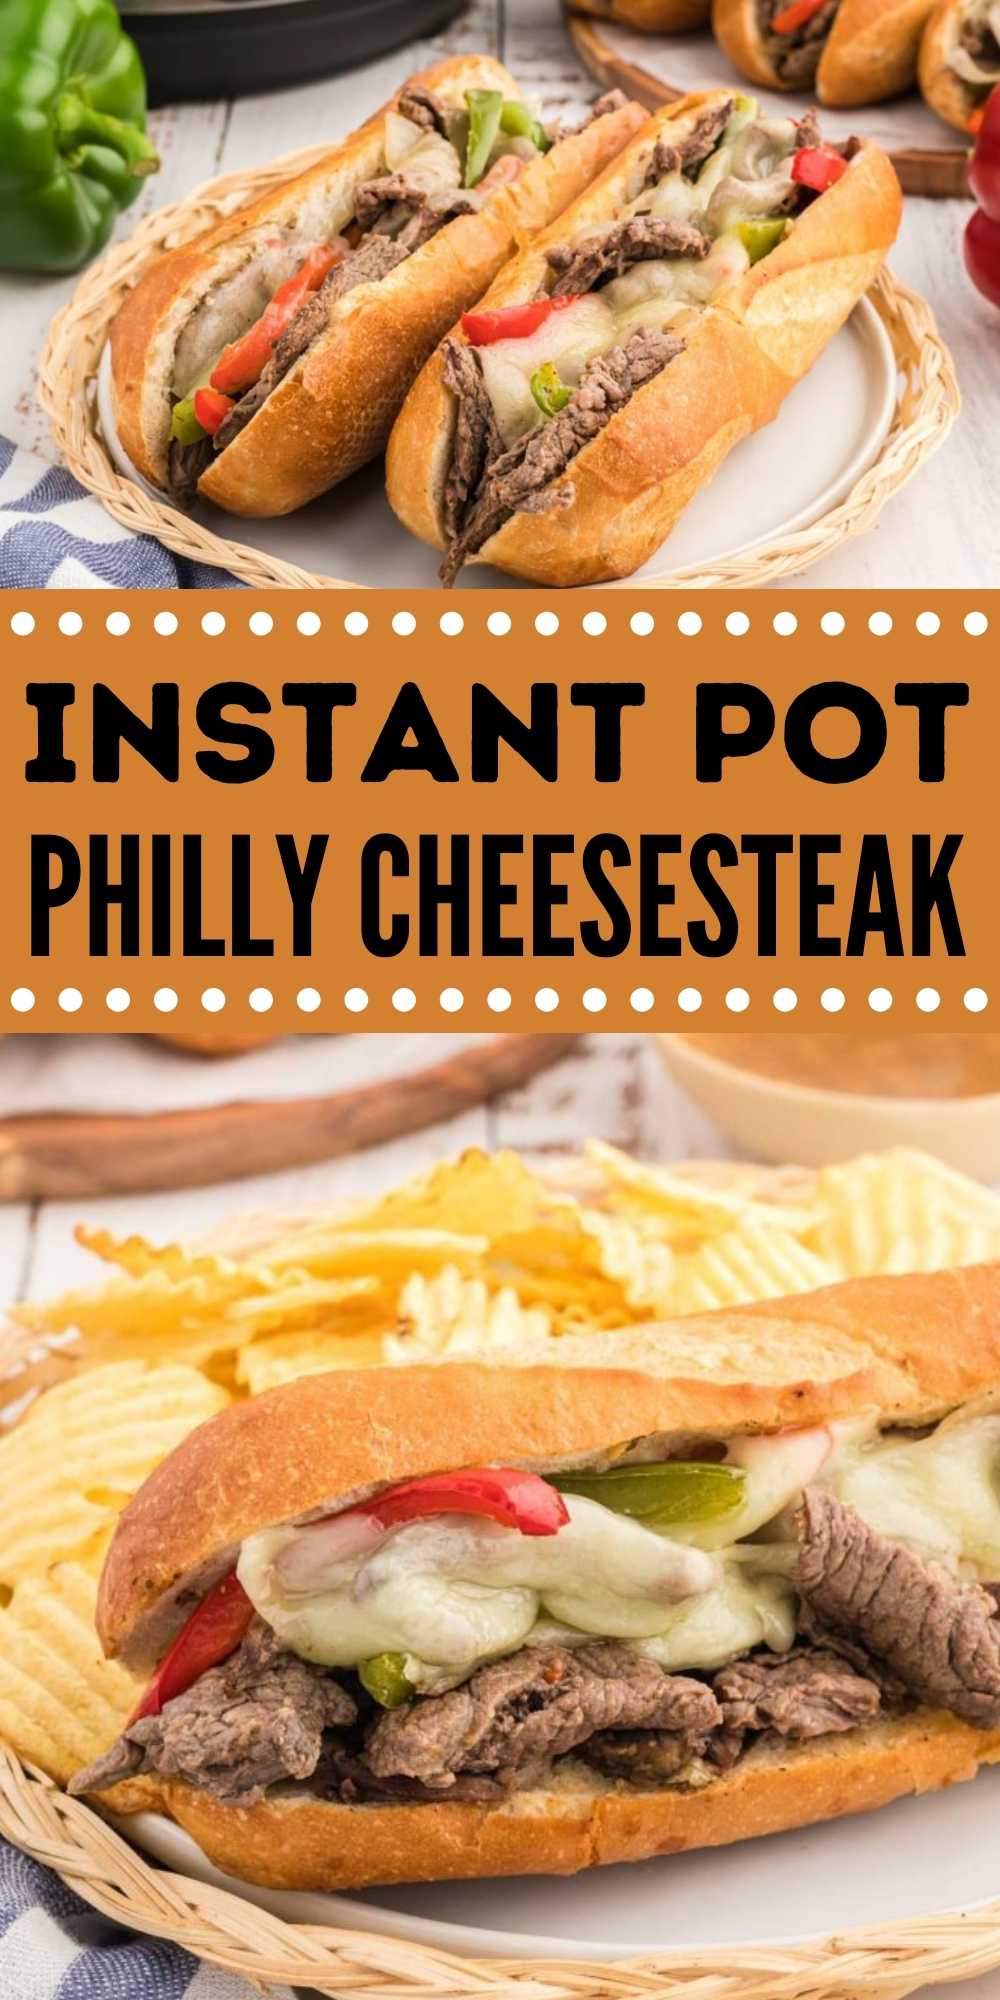 You can enjoy Instant Pot Philly Cheesesteak Recipe for an easy dinner during busy weeknights. The pressure cooker makes this meal so easy and your family can enjoy all that you love about a Philly Cheesesteak with very little work. #eatingonadime #phillycheesesteak #instantpotrecipes